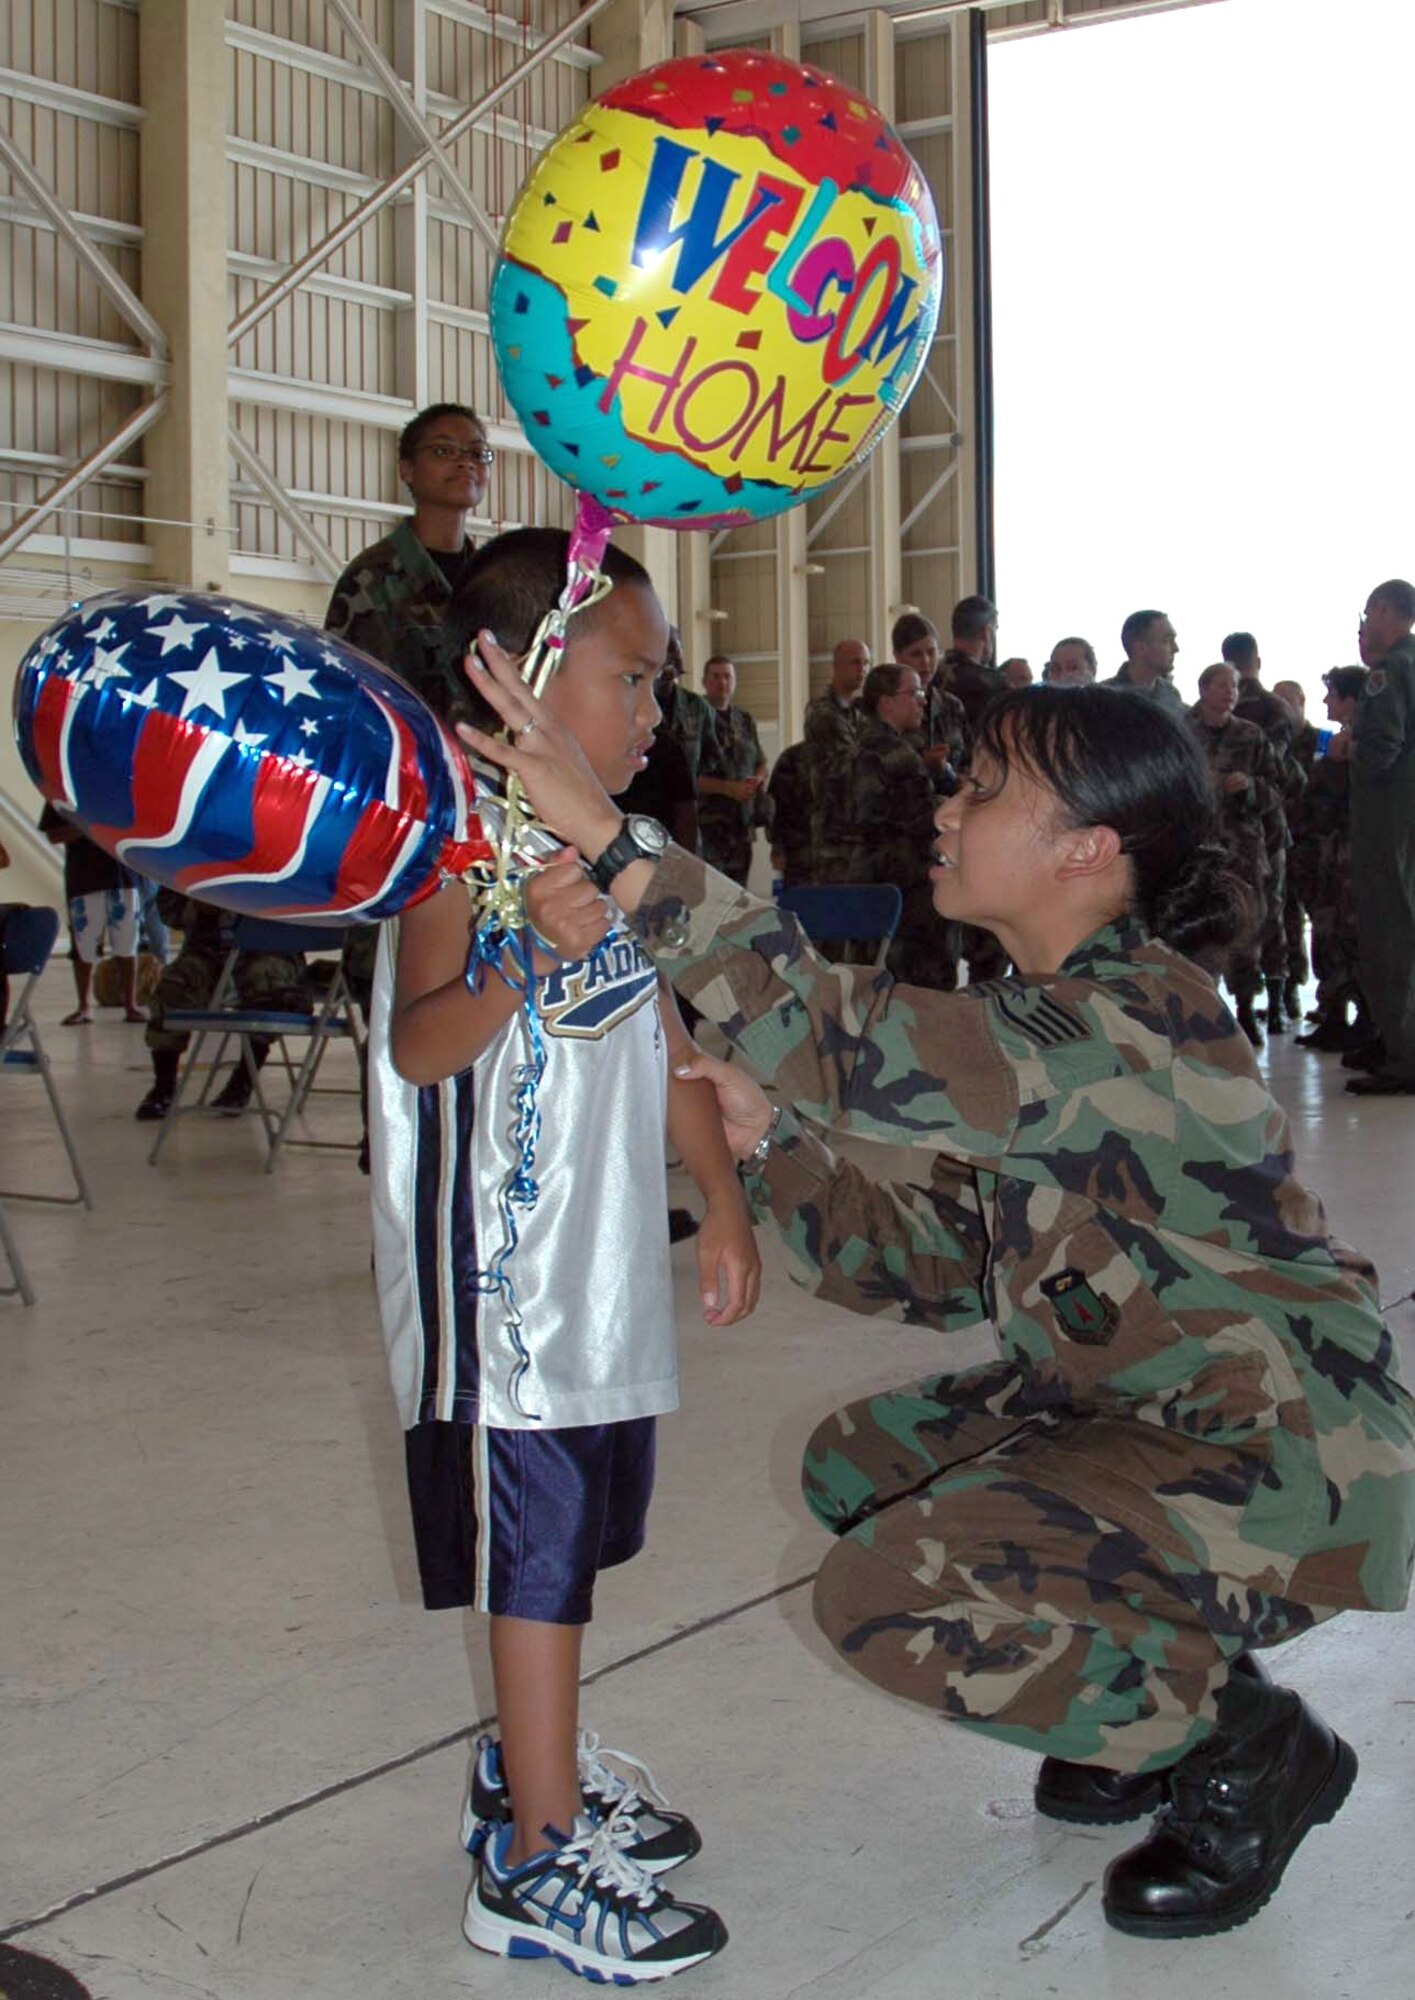 Staff Sgt. Mary Anne Viloria shares a moment with her 7-year-old son, R.J., during a welcome home celebration at Andersen Air Force Base, Guam, Sept. 10. Members from the 36th Medical Group, 36th Wing and the U.S. Navy Helicopter Sea Combat Squadron 25 returned home following a 72-day humanitarian and civic assistance deployment on the USNS Mercy. Sergeant Viloria is assigned to the 36th MDG. (U.S. Air Force photo/Senior Airman Angelique Smyth)